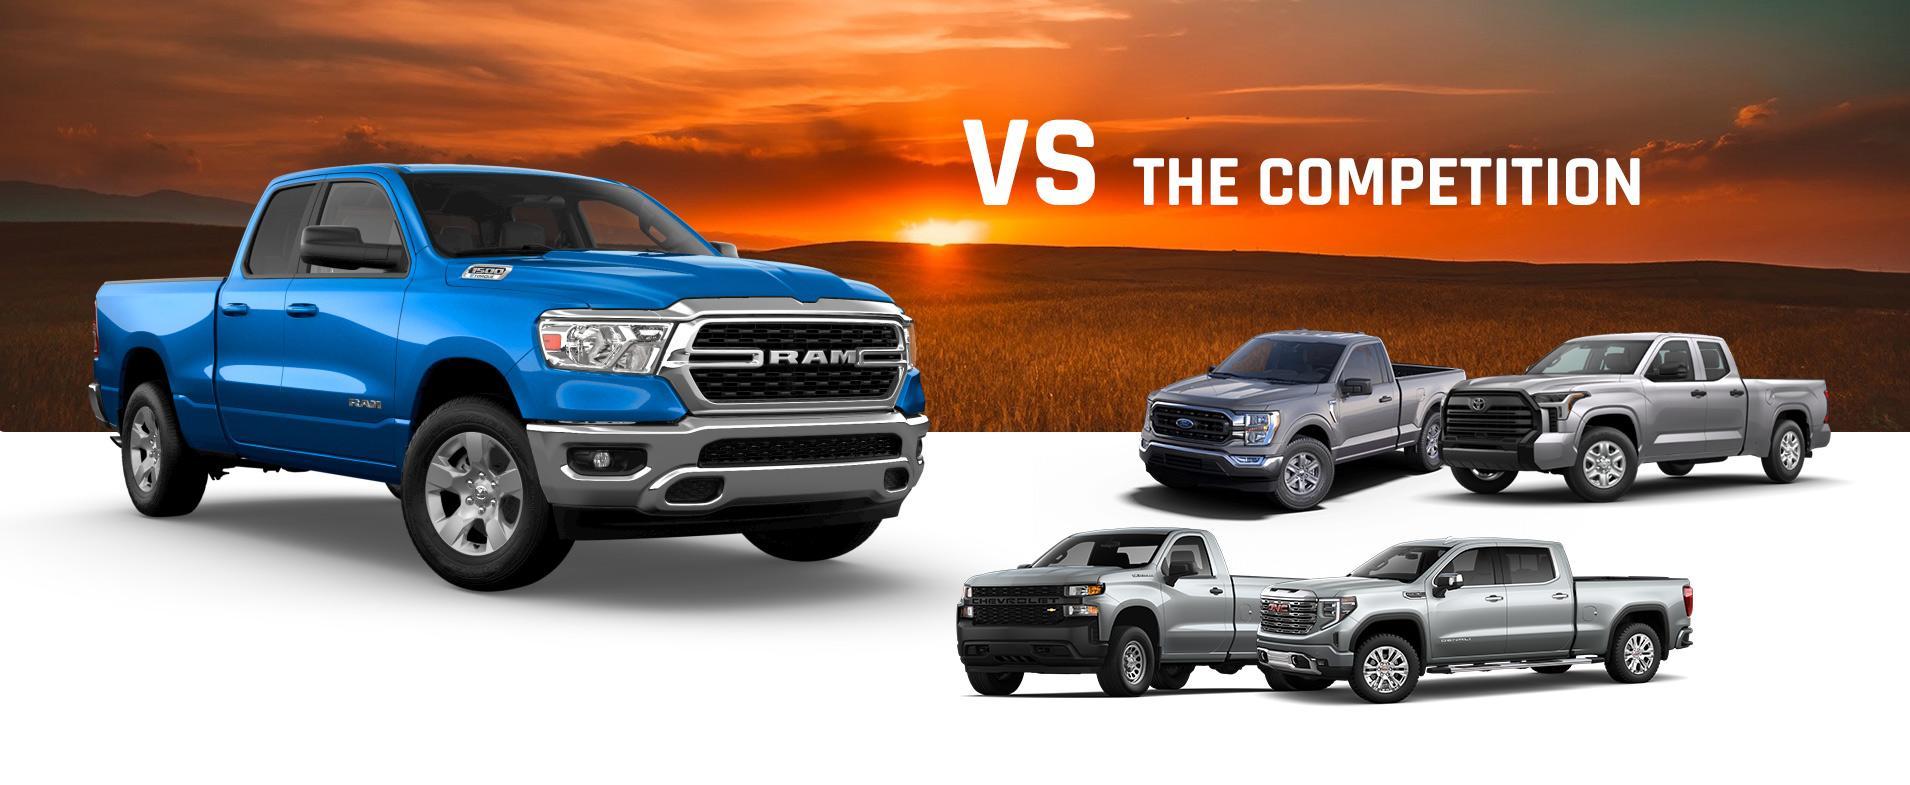 Ram 1500 vs the competition